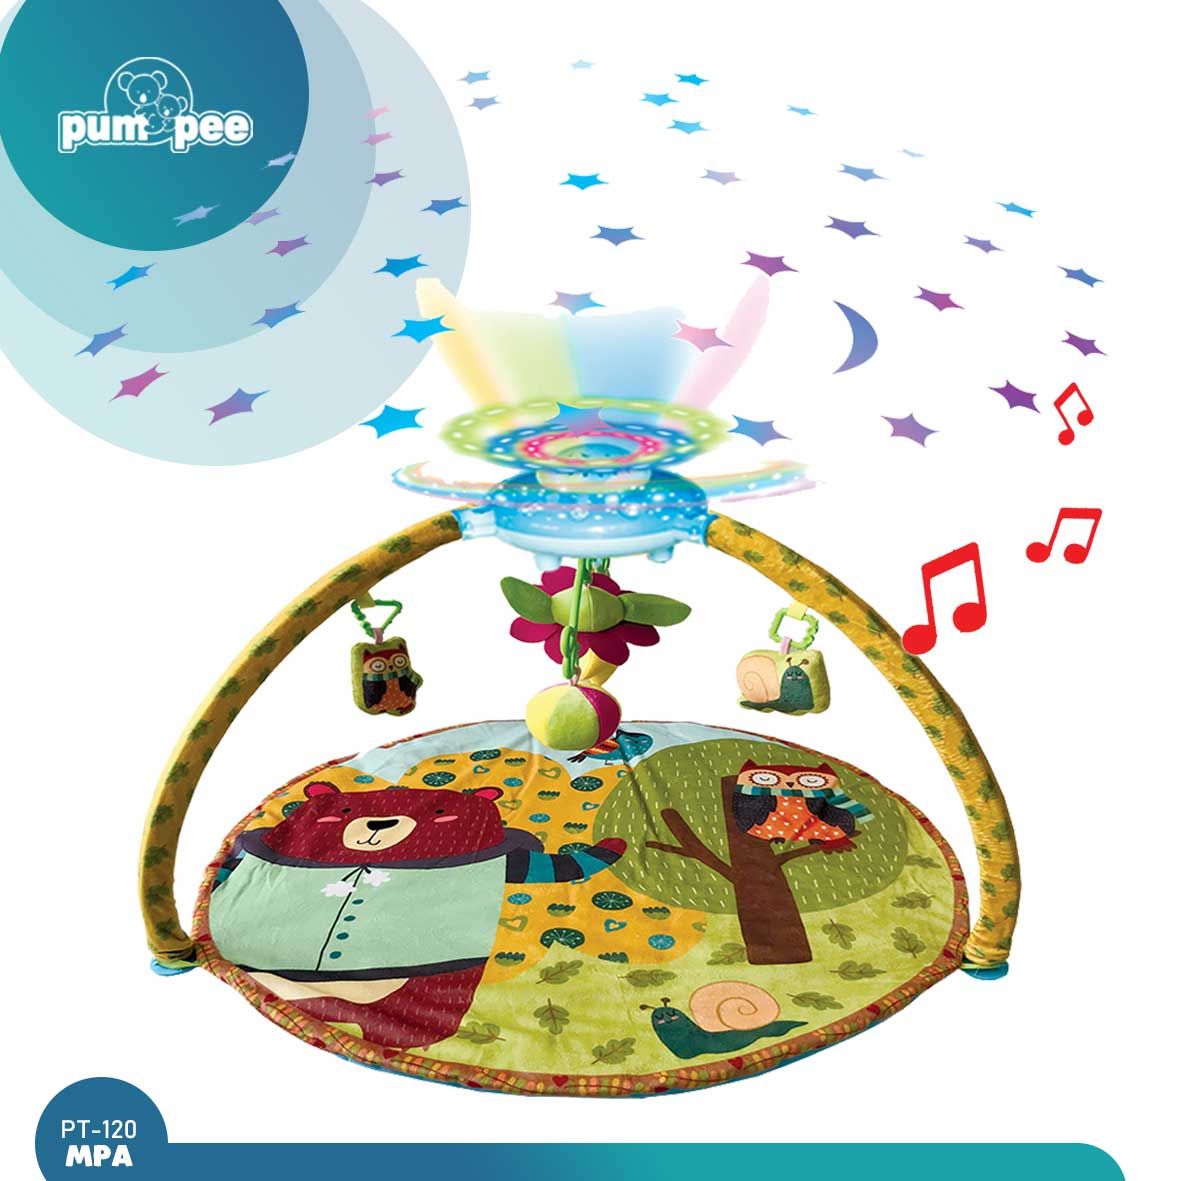 Pumpee Projector with Music Baby Playmat | PT-120MPA - 1